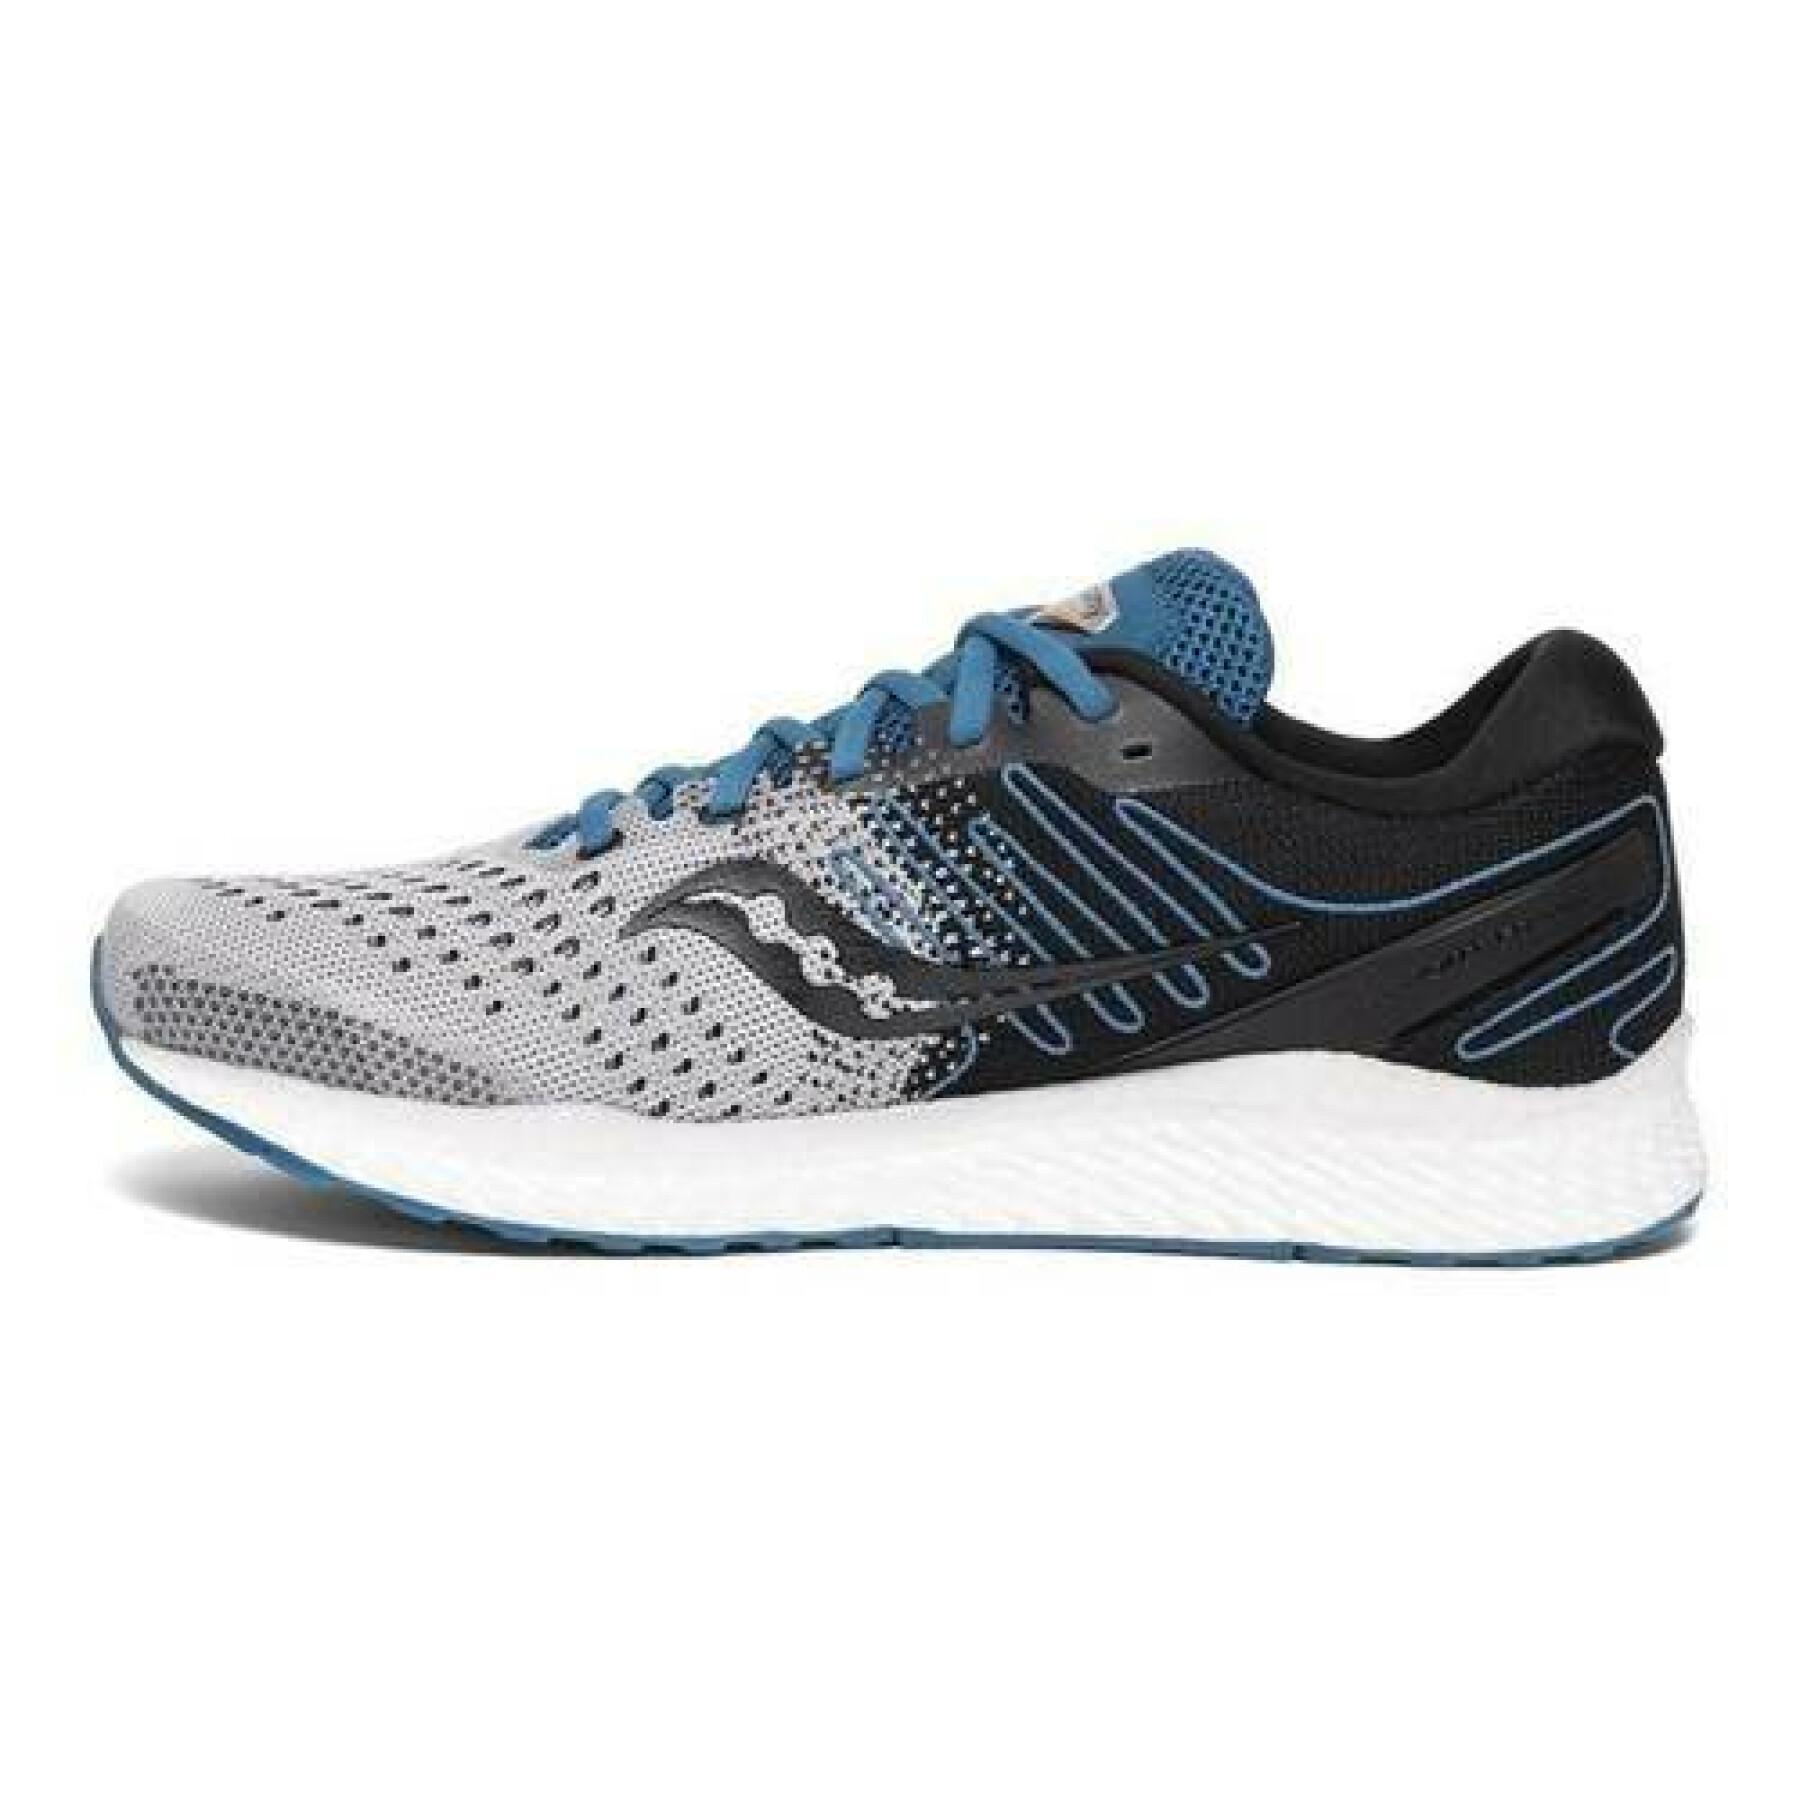 Shoes Saucony freedom 3